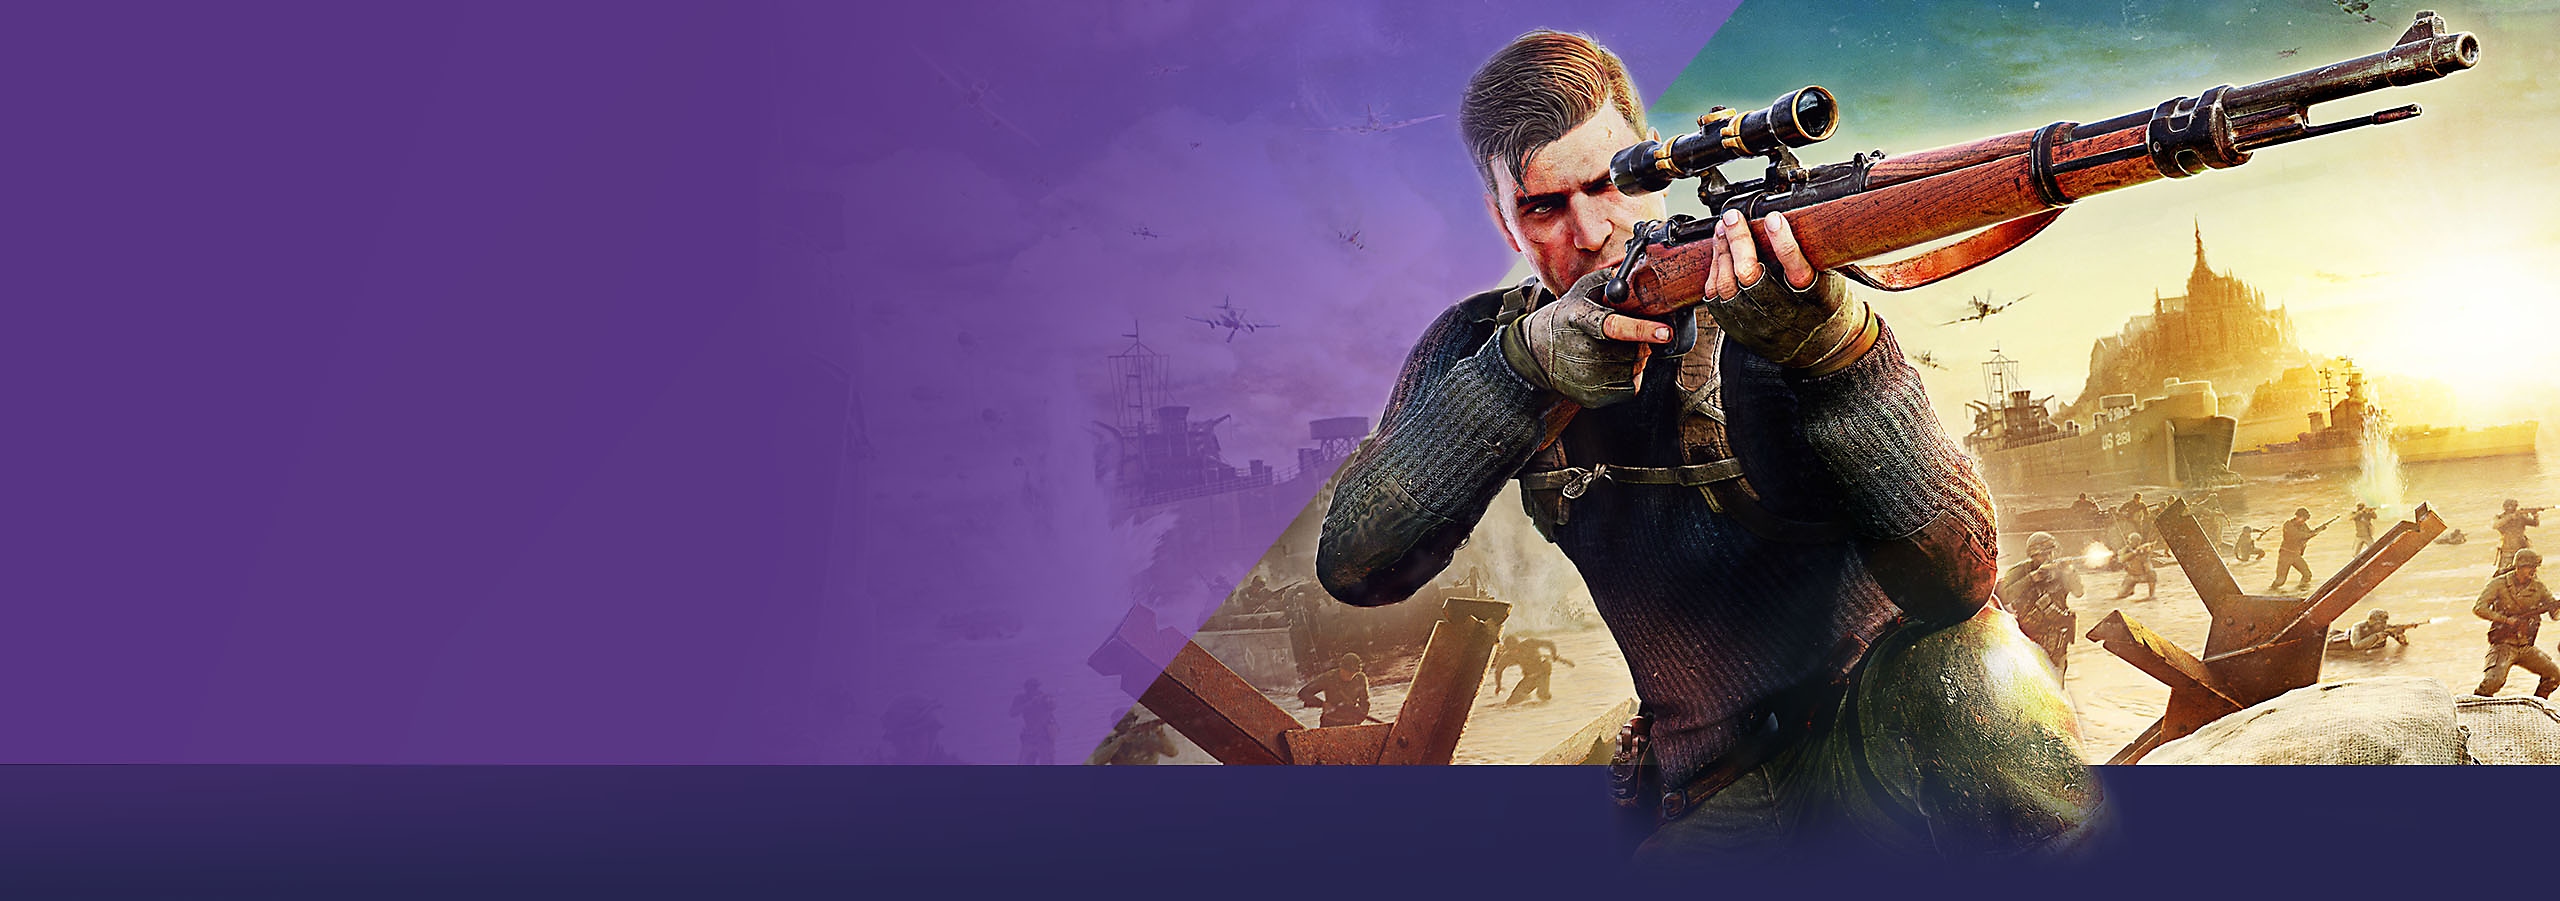 This month on PlayStation hero image featuring key art from Sniper Elite 5